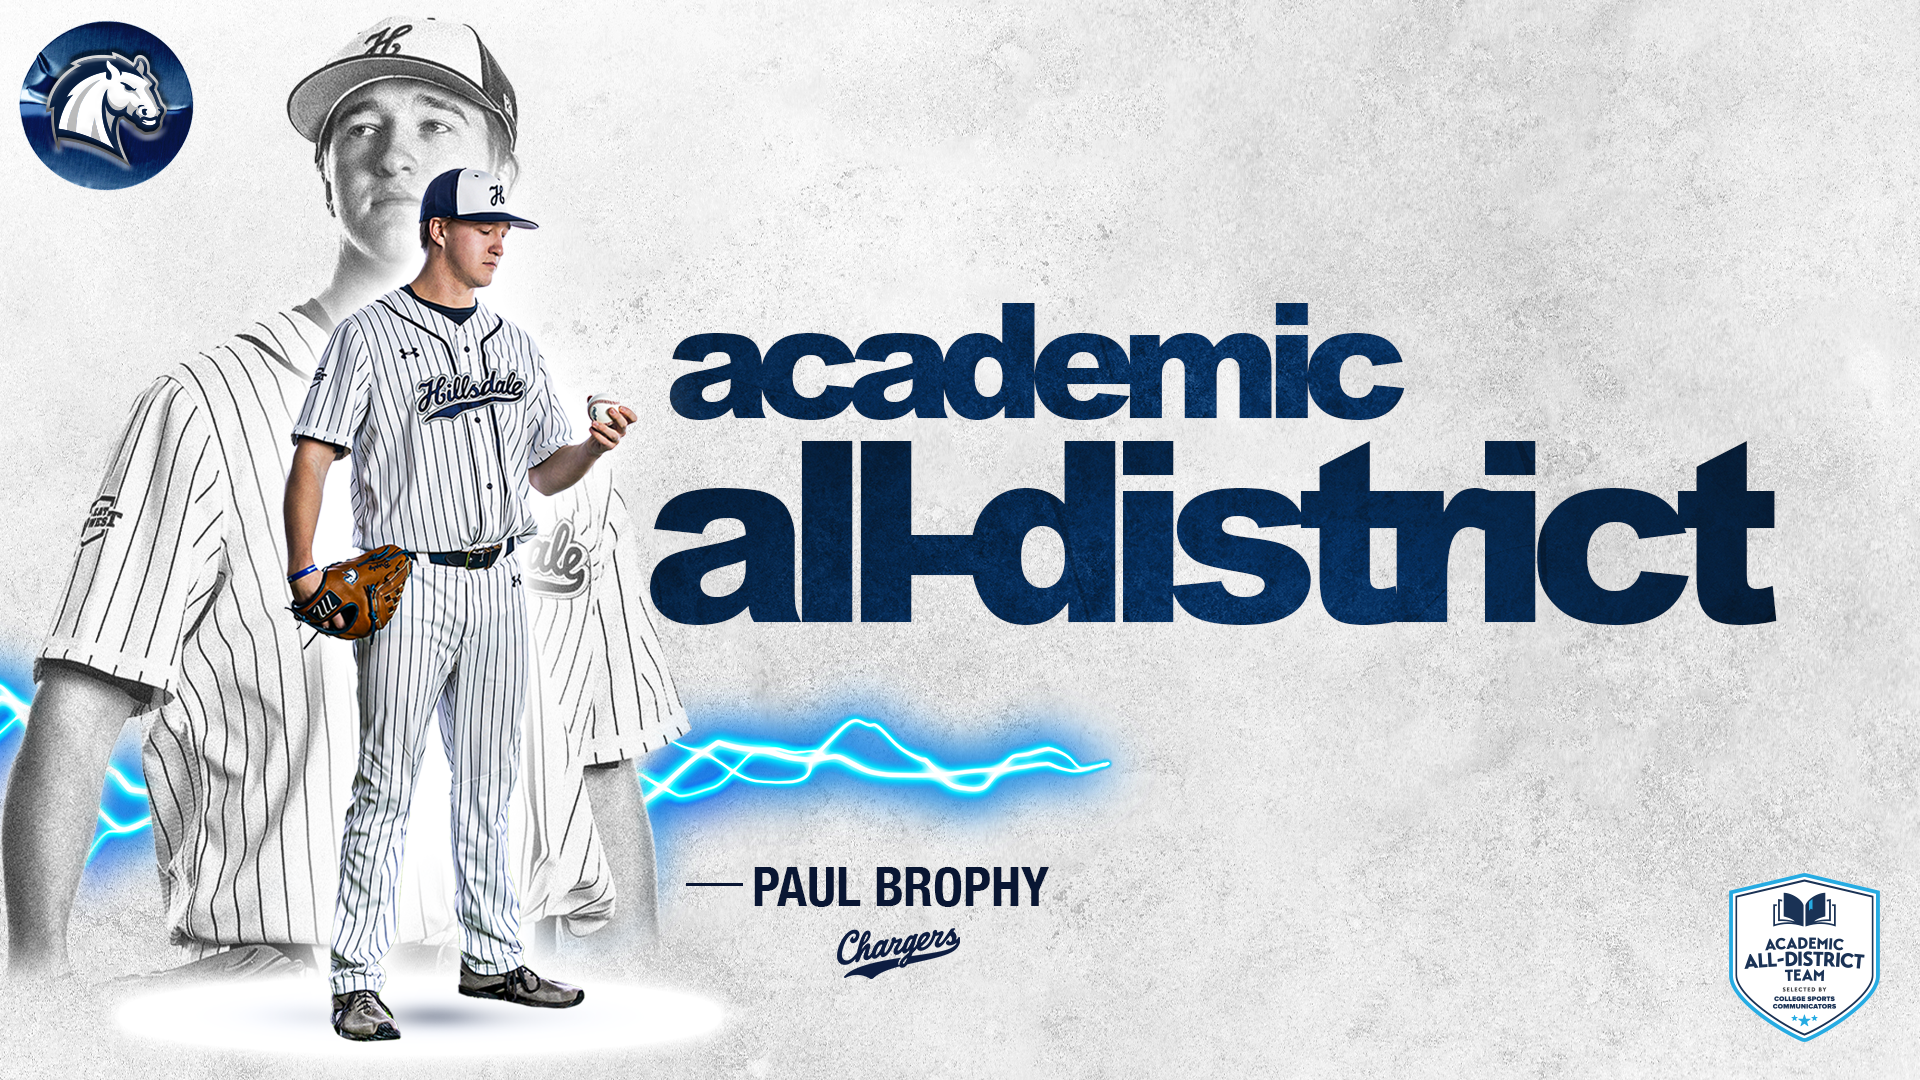 Chargers pitcher Paul Brophy closes career with second CSC Academic All-District honor